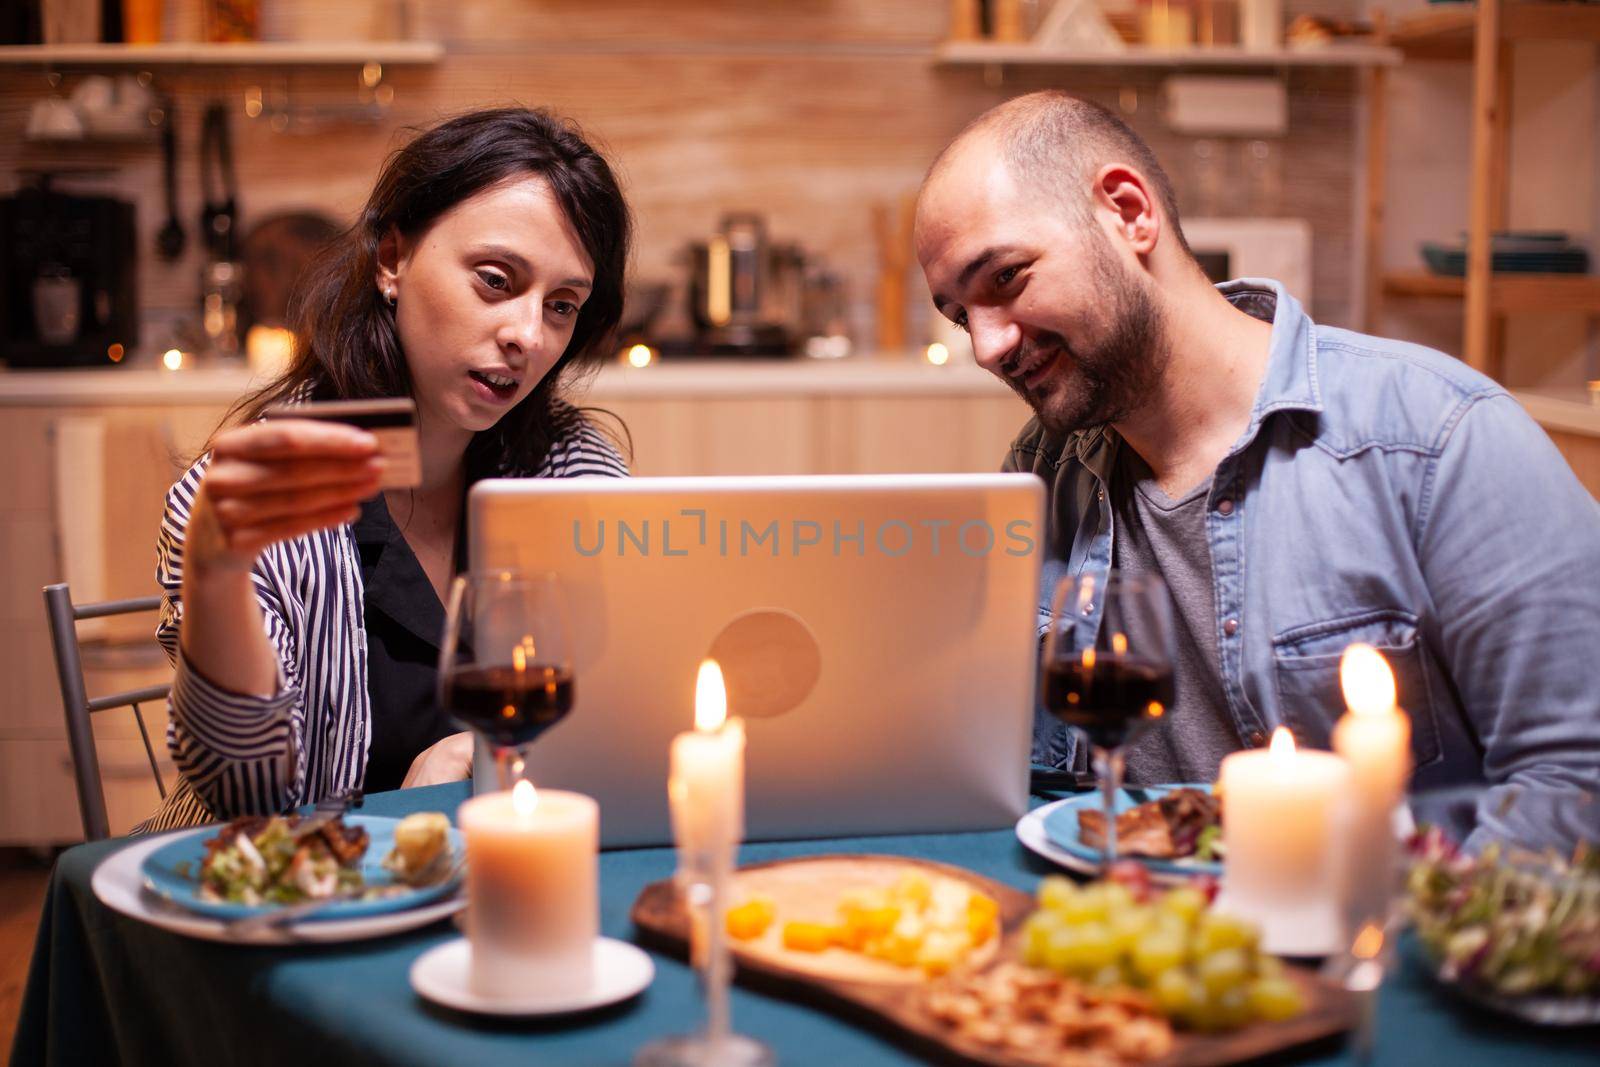 Making online payment during dinner by DCStudio